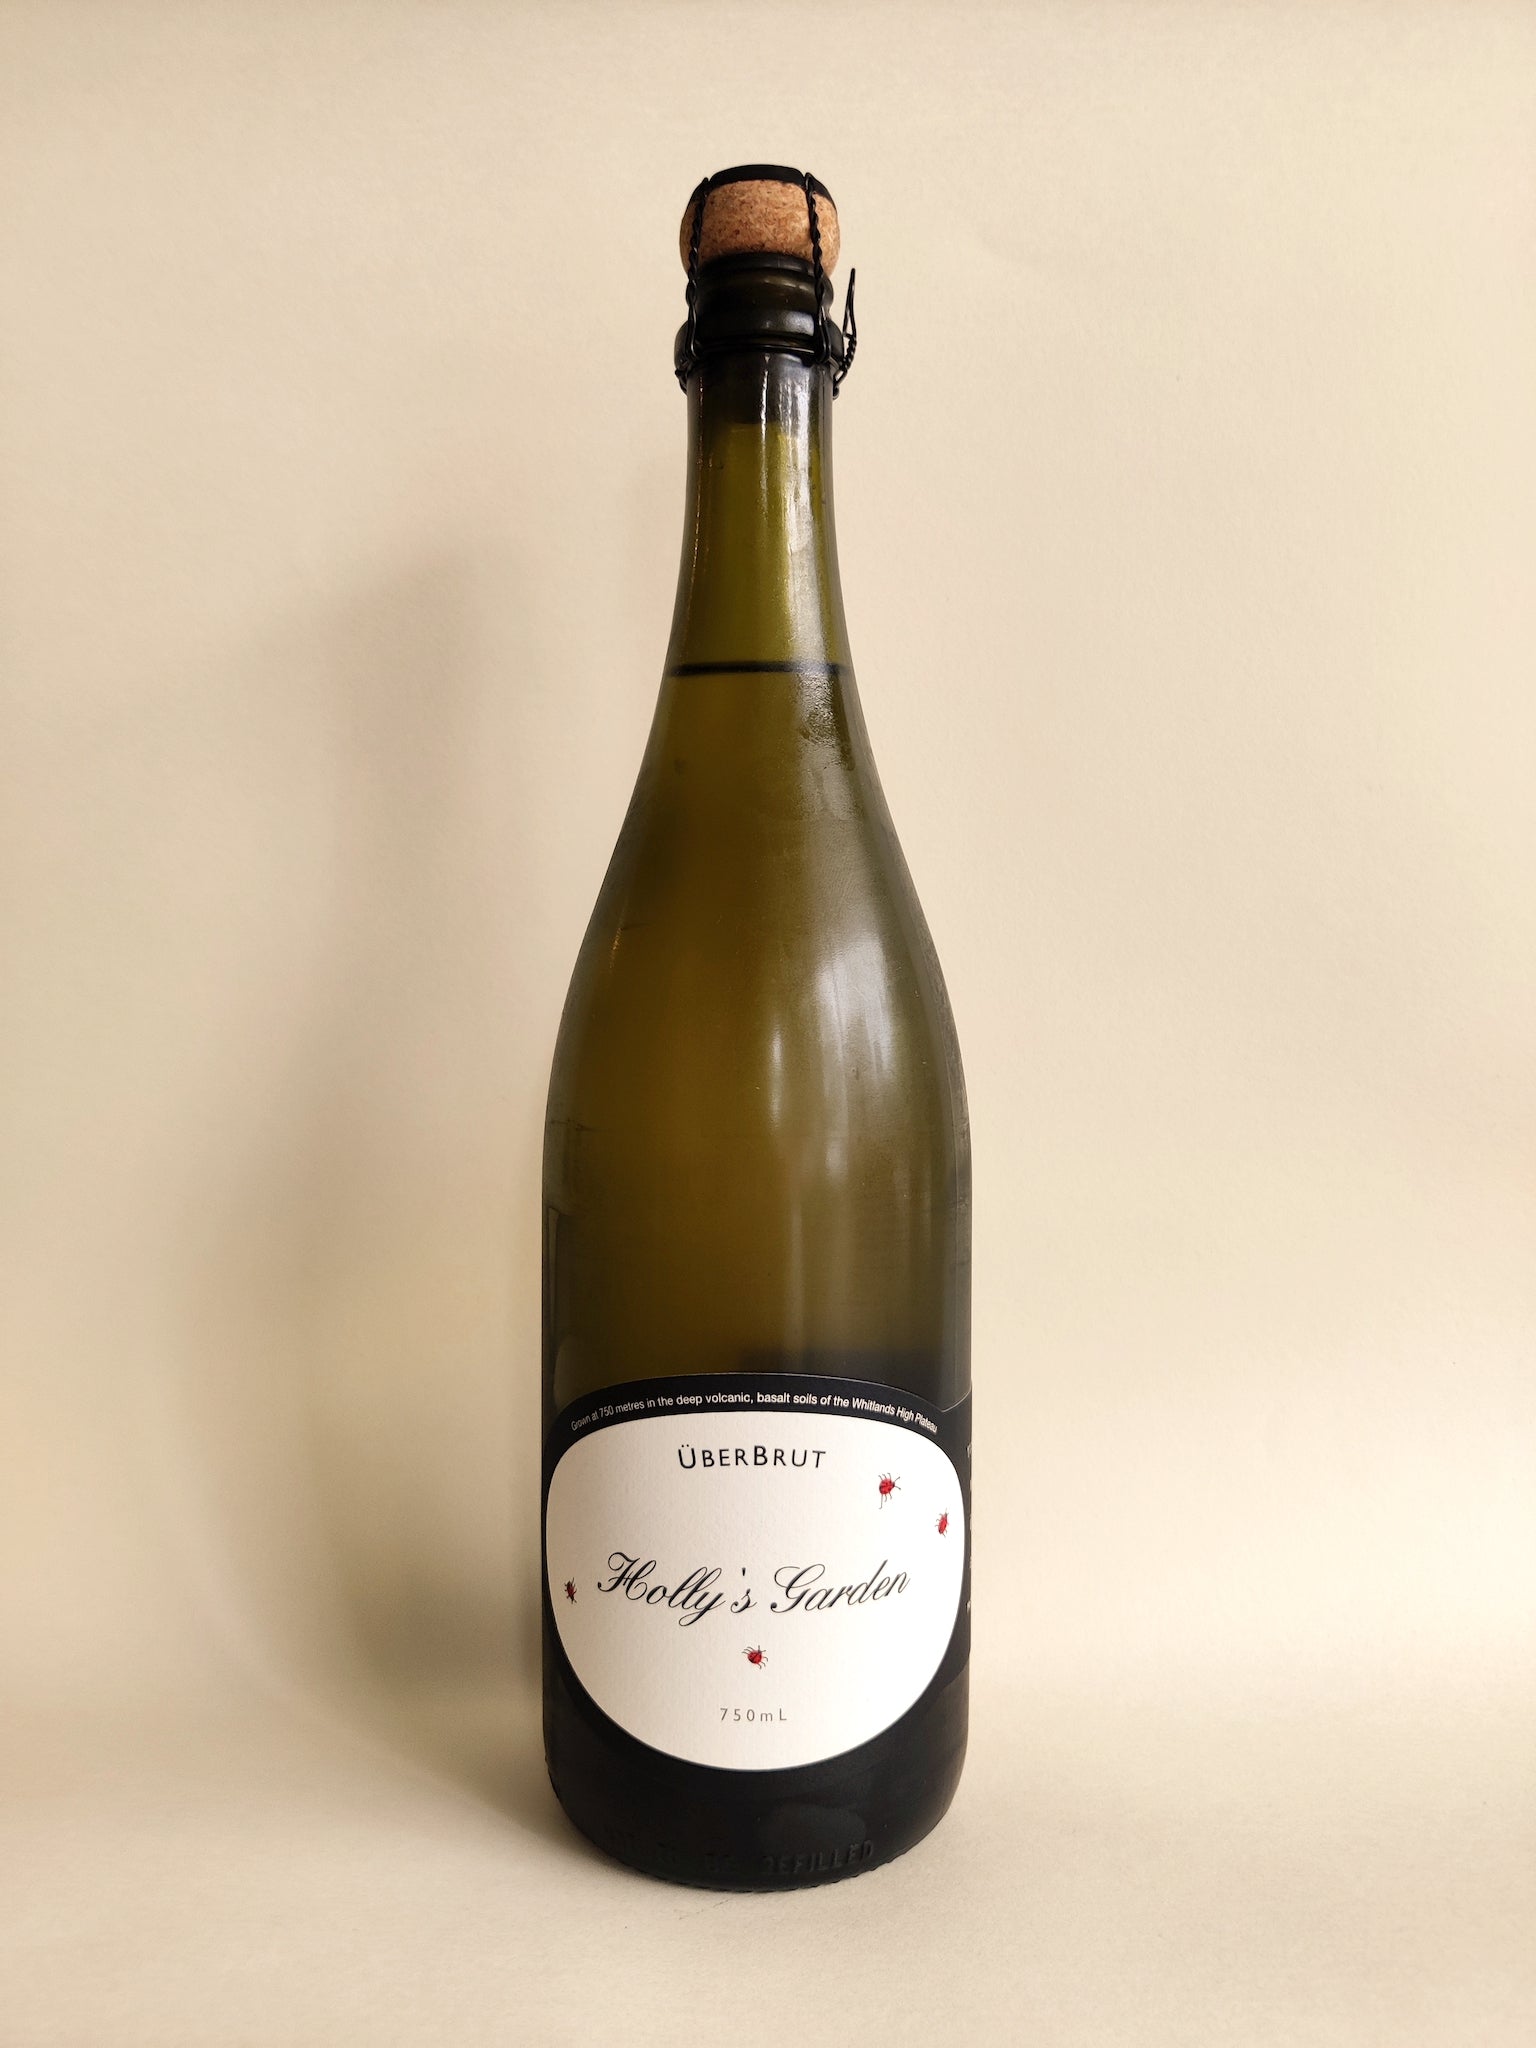 A bottle of Holly's Garden Uber Brut Sparkling Wine from Whitlands, Victoria.